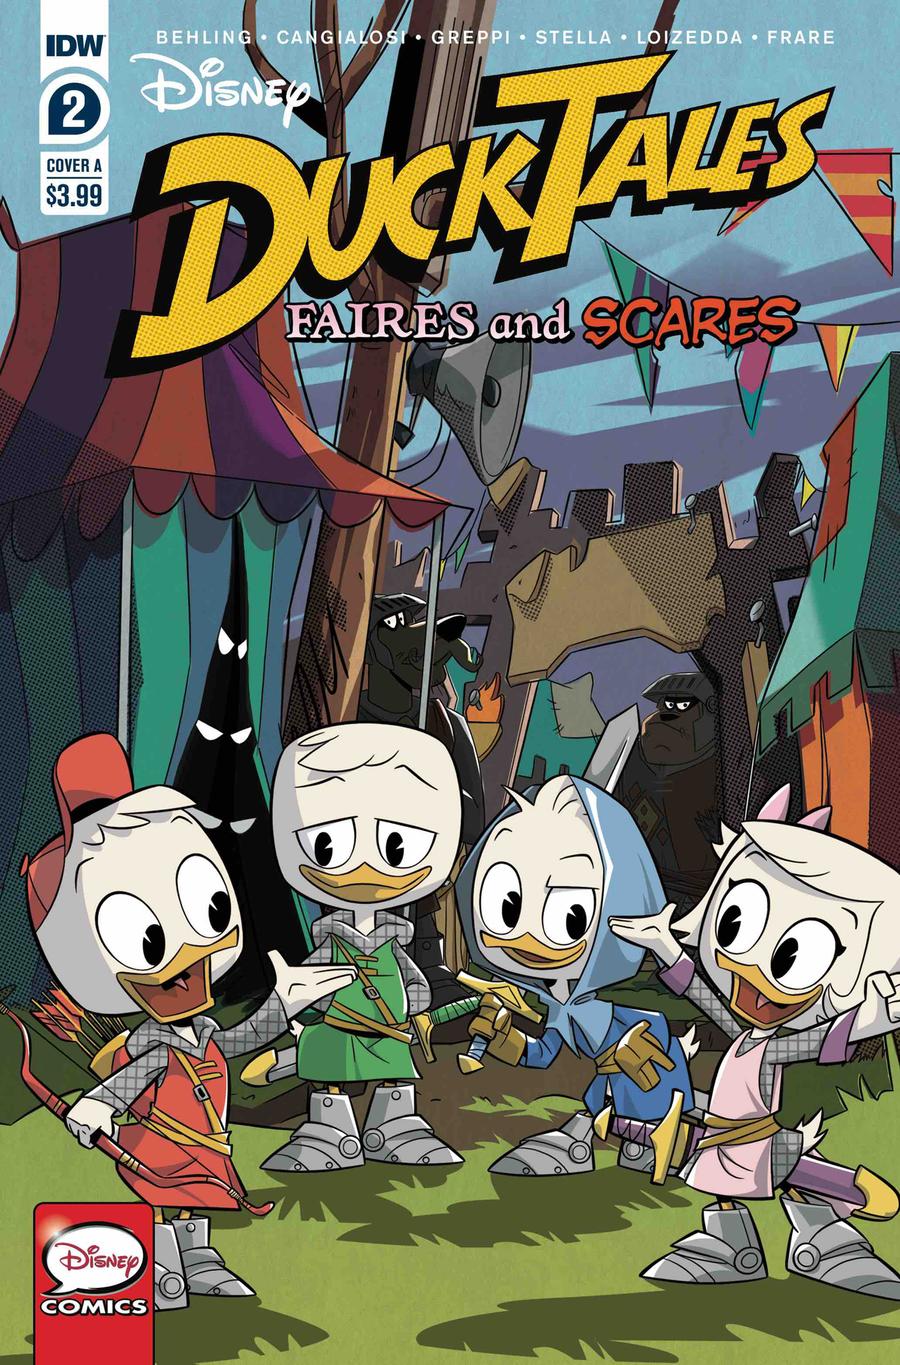 Ducktales Faires And Scares #2 Cover A Regular Cover